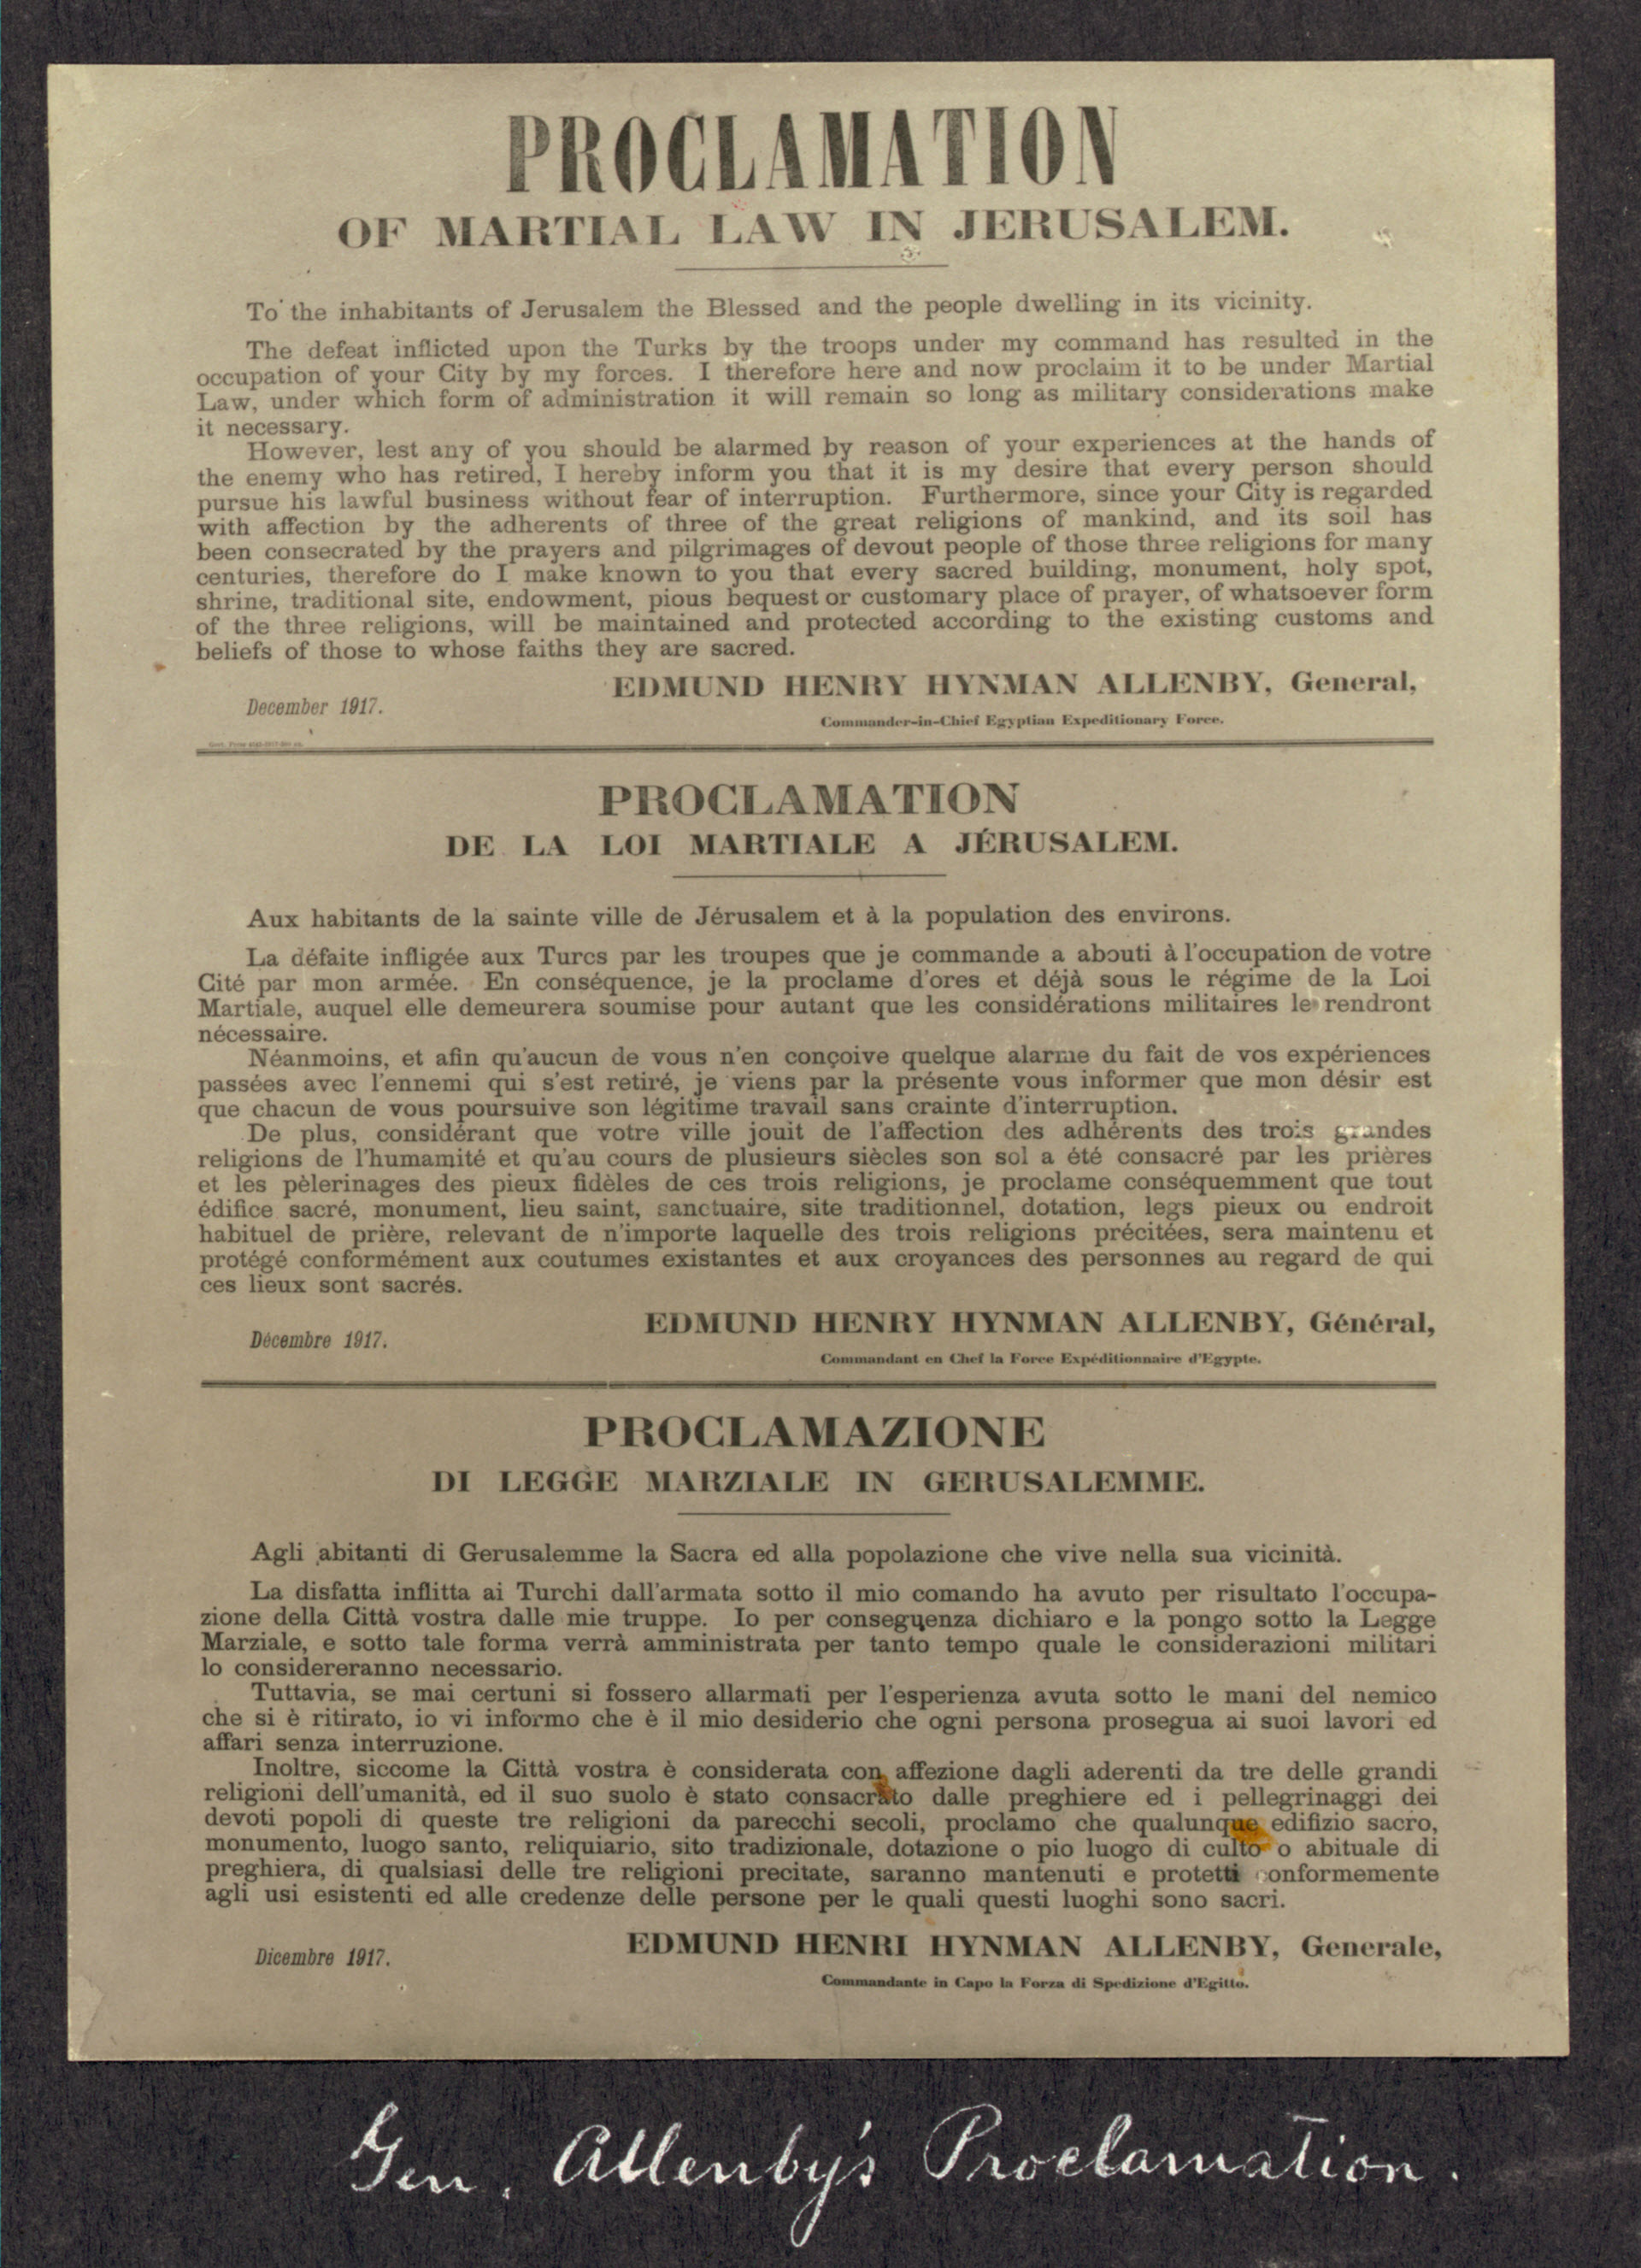 The actual proclamation of martial law as declared by General Allenby on December 11, 1917